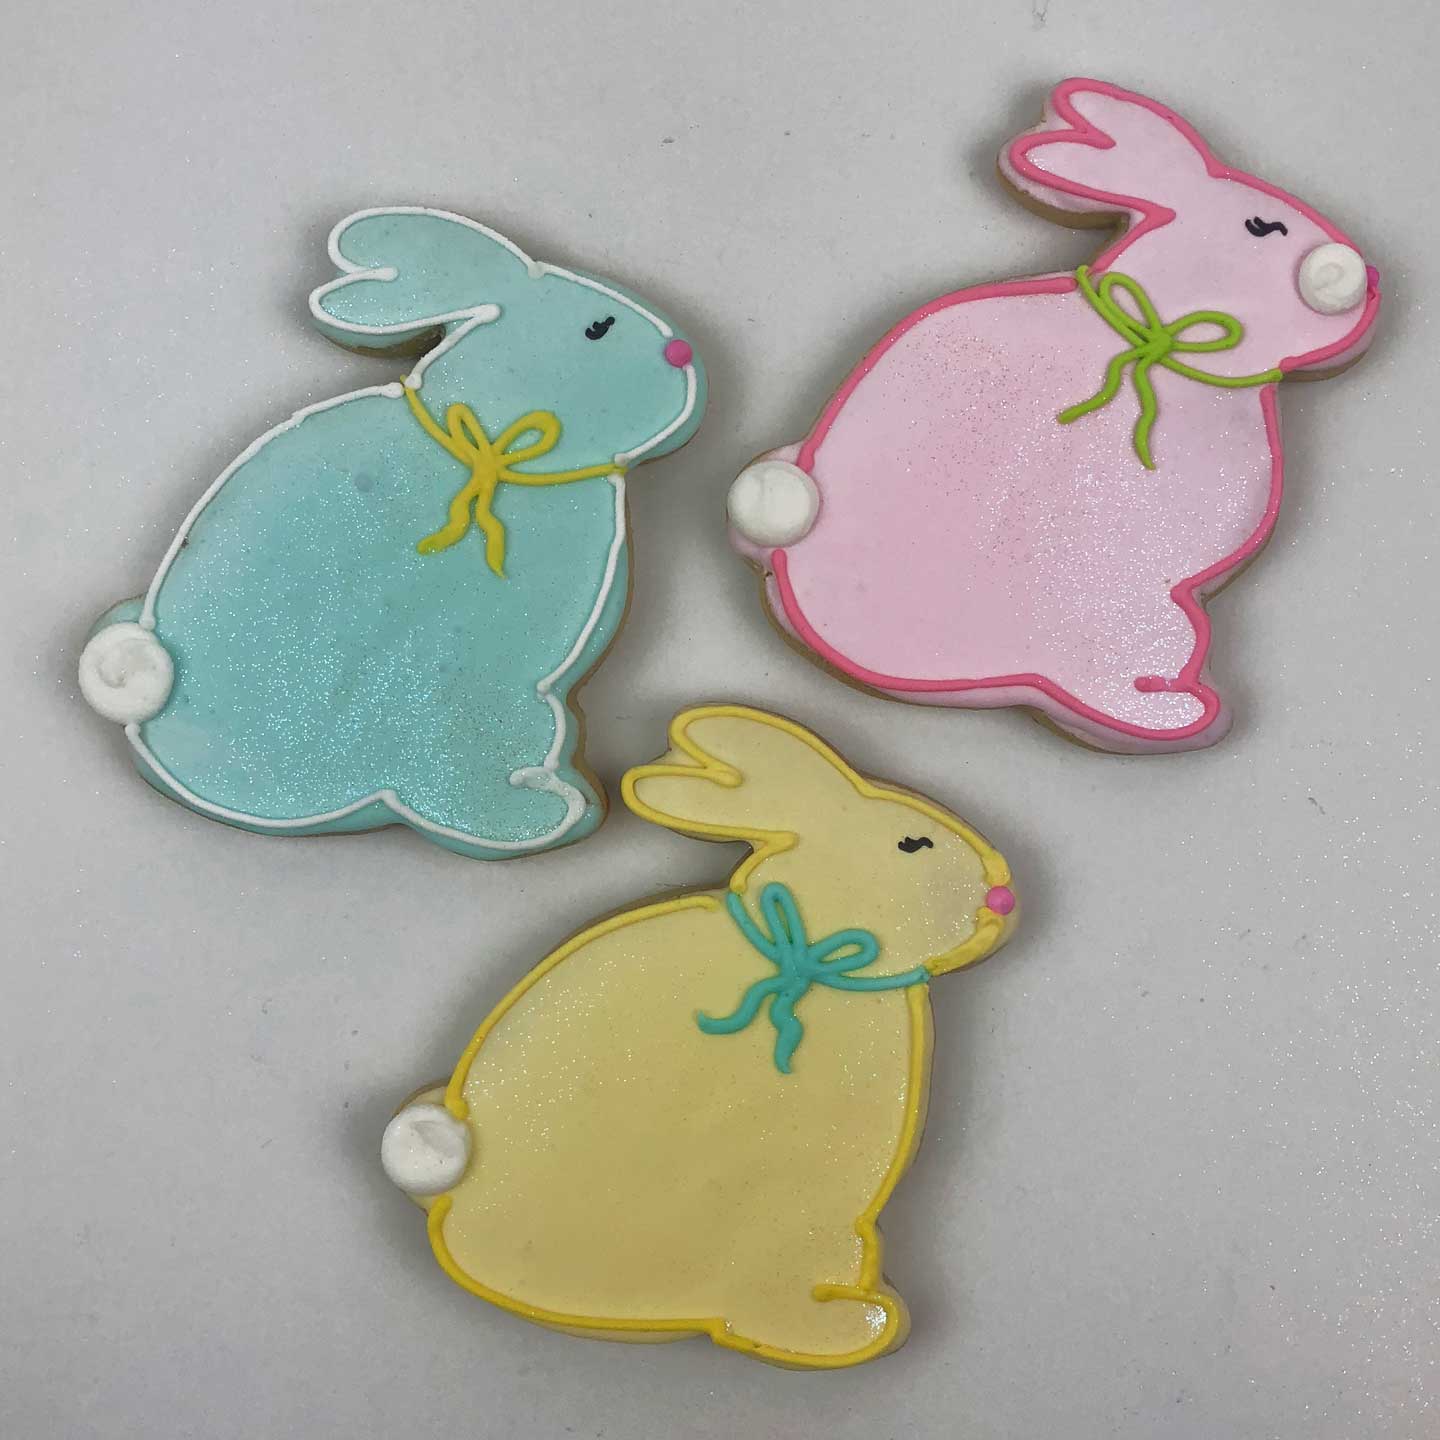 Blue, pink, and yellow Easter Bunny Cookies